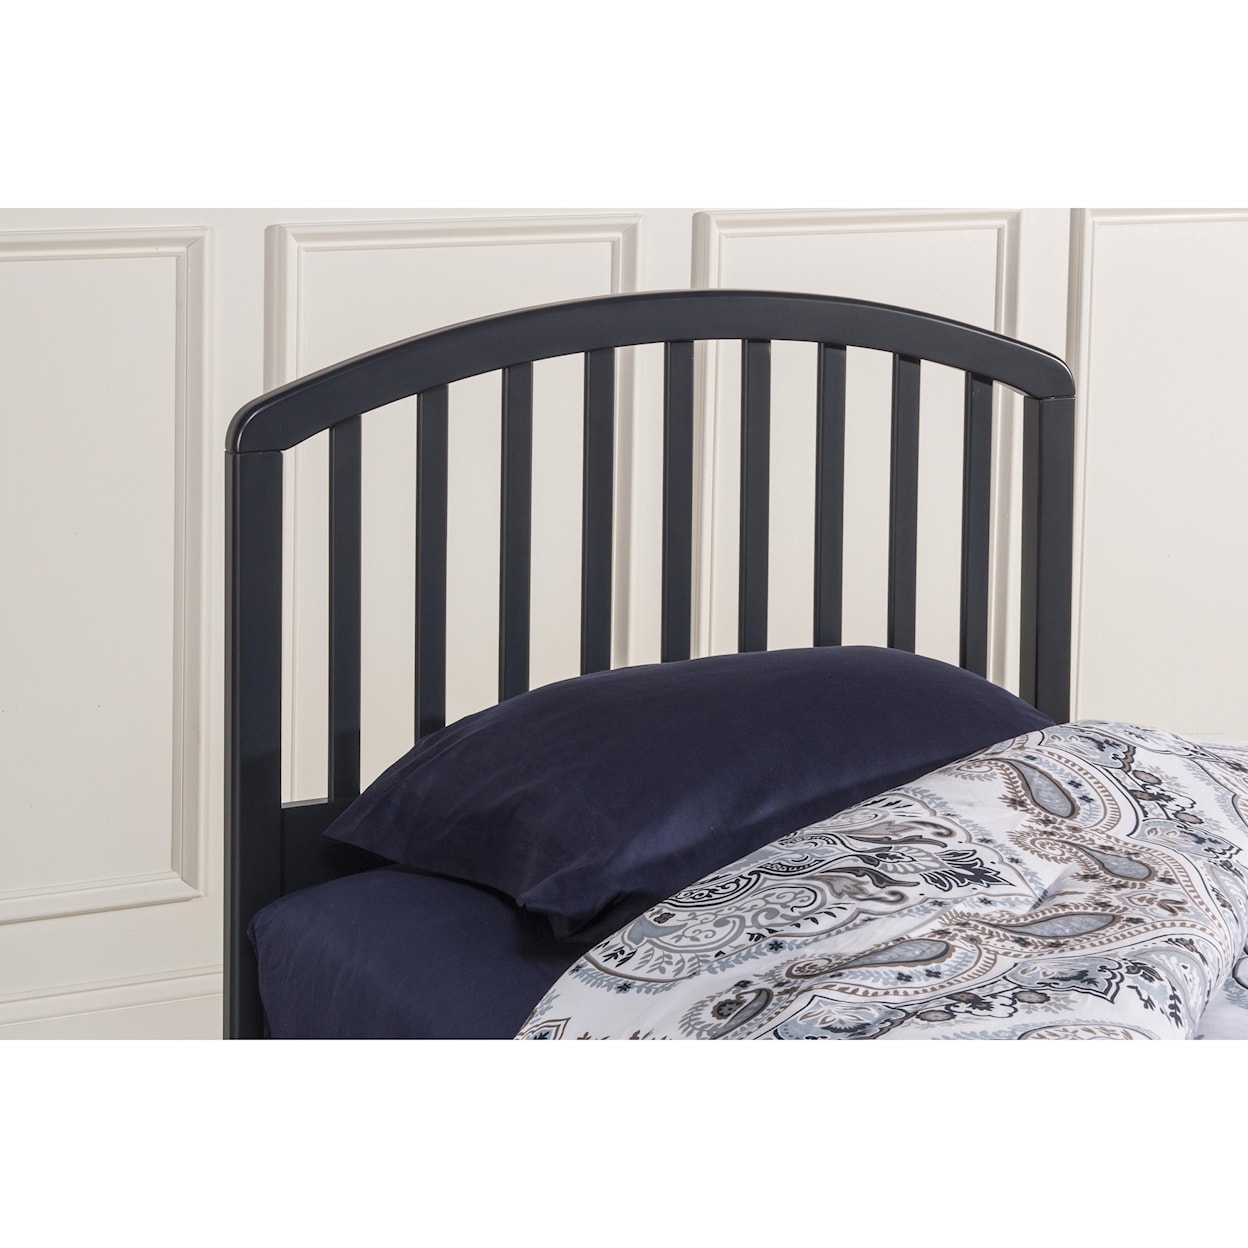 Hillsdale Wood Beds Twin Headboard with Frame